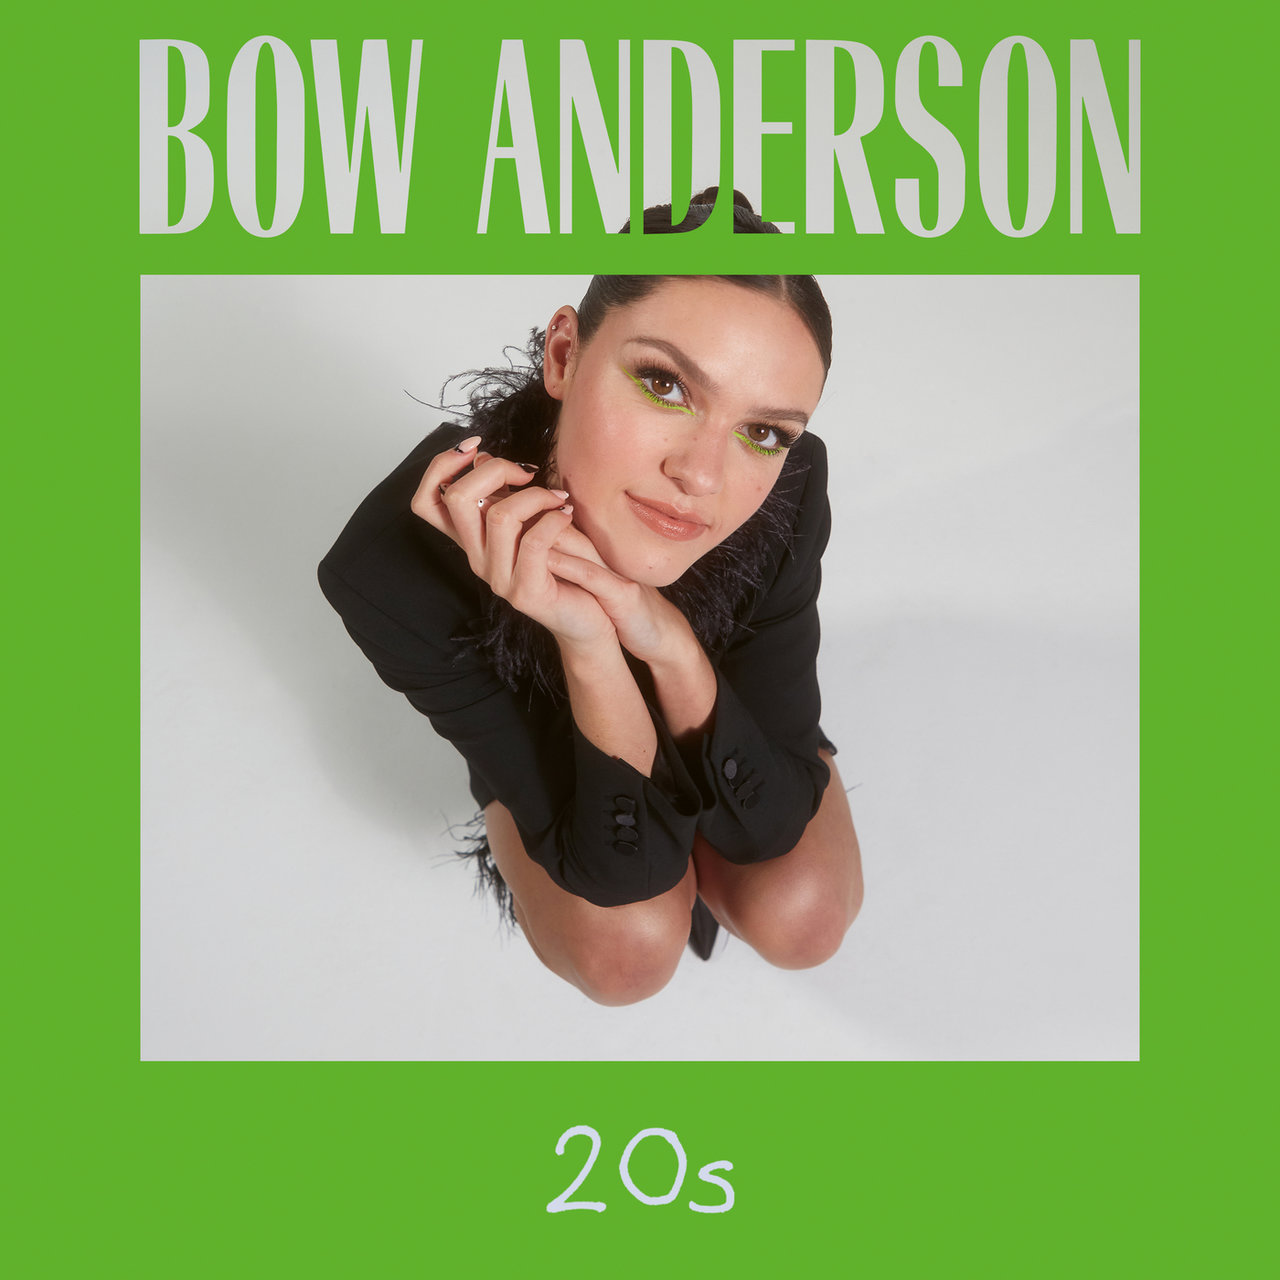 Bow Anderson 20s cover artwork